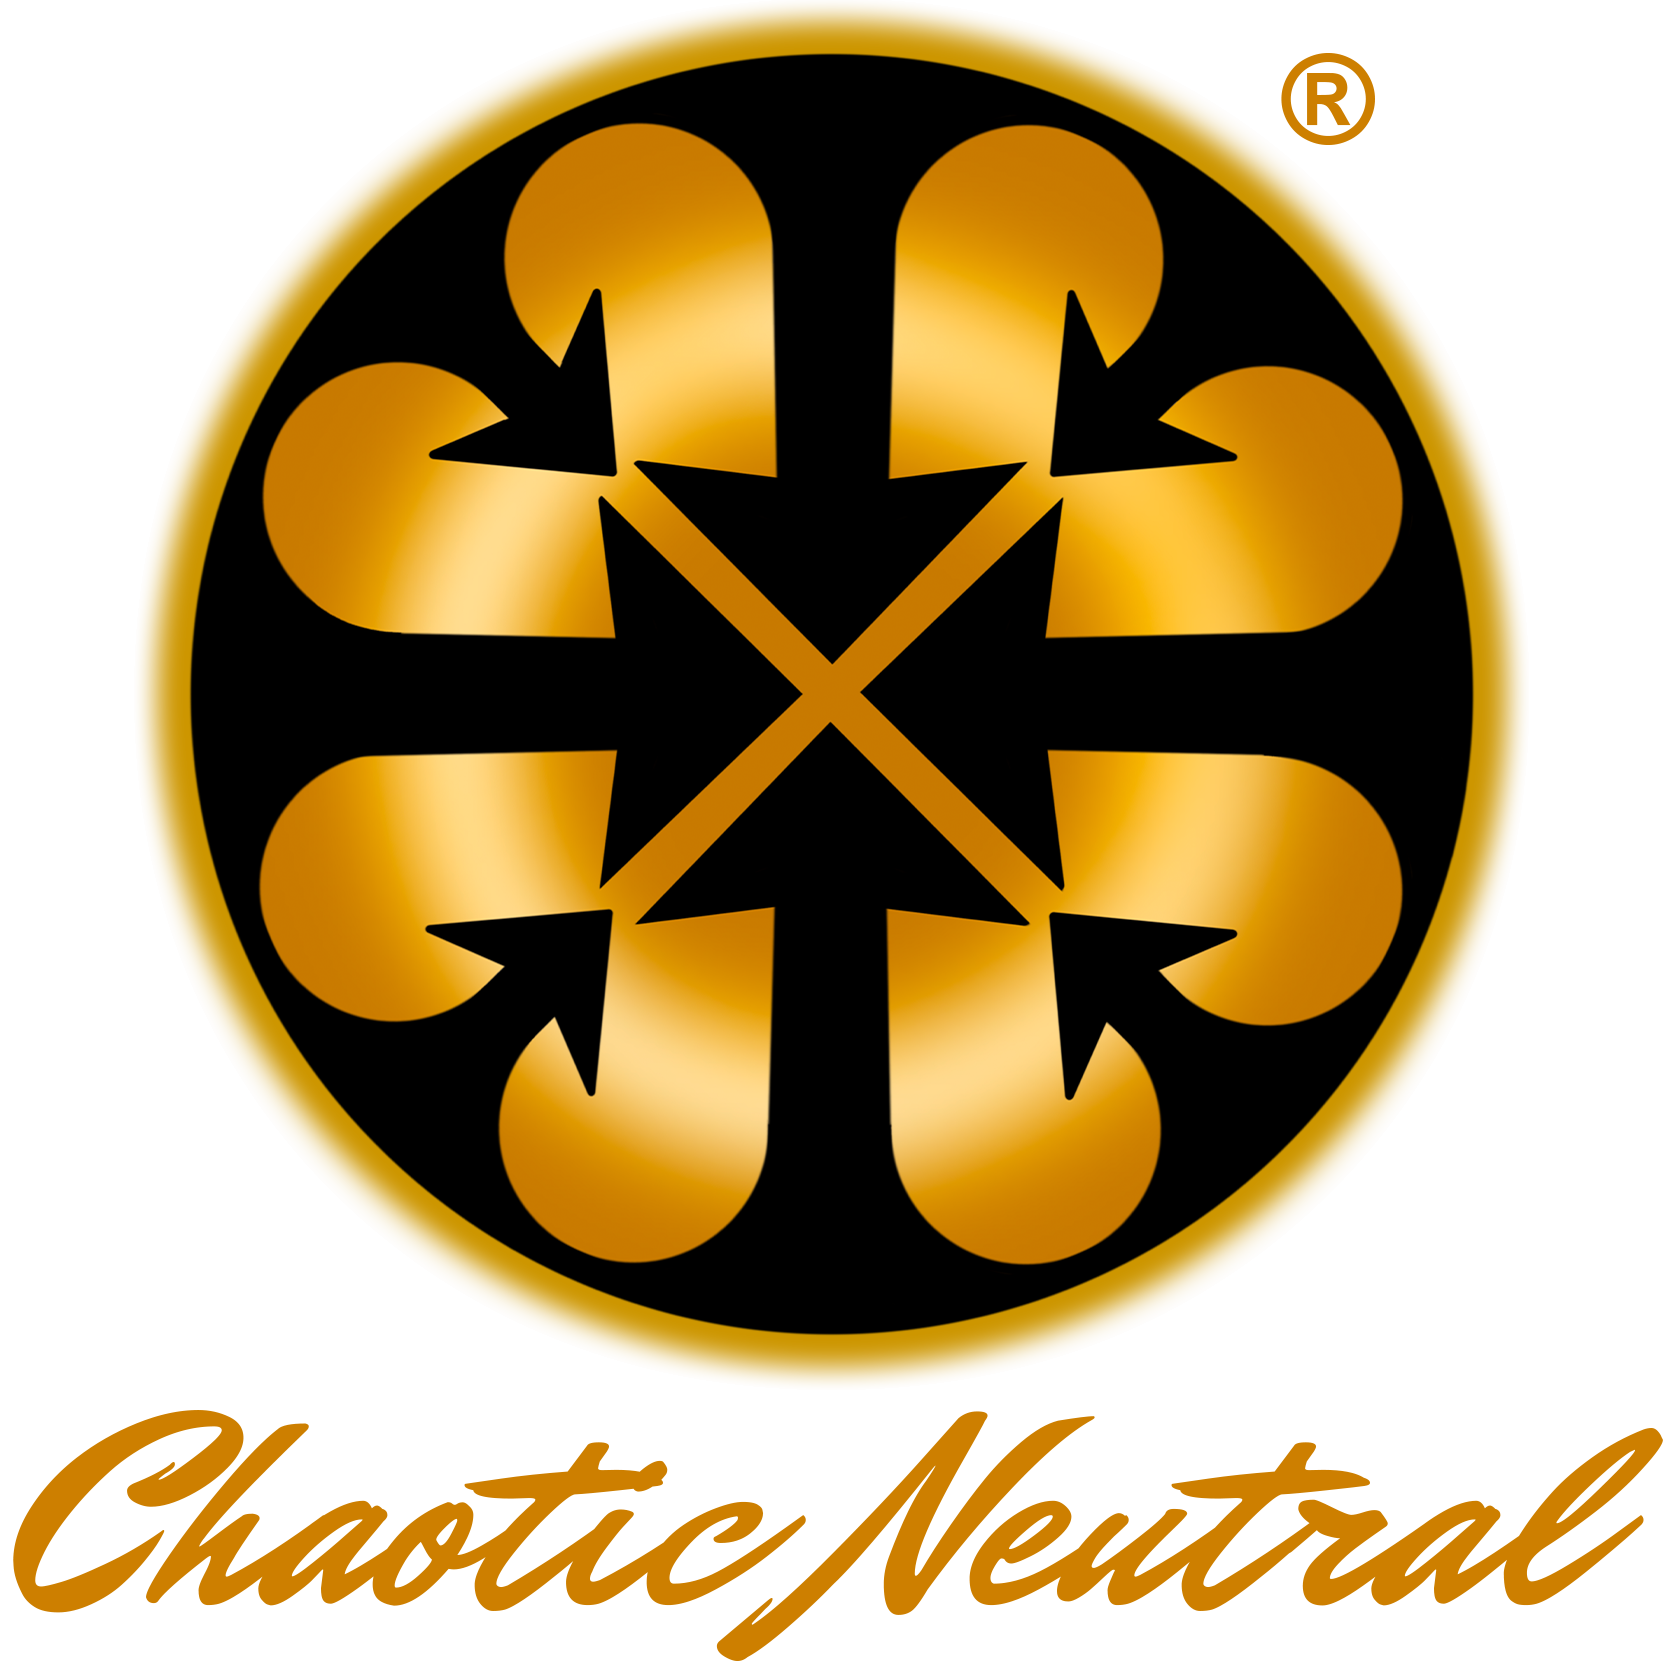 Chaotic Neutral - Chaos Simplified